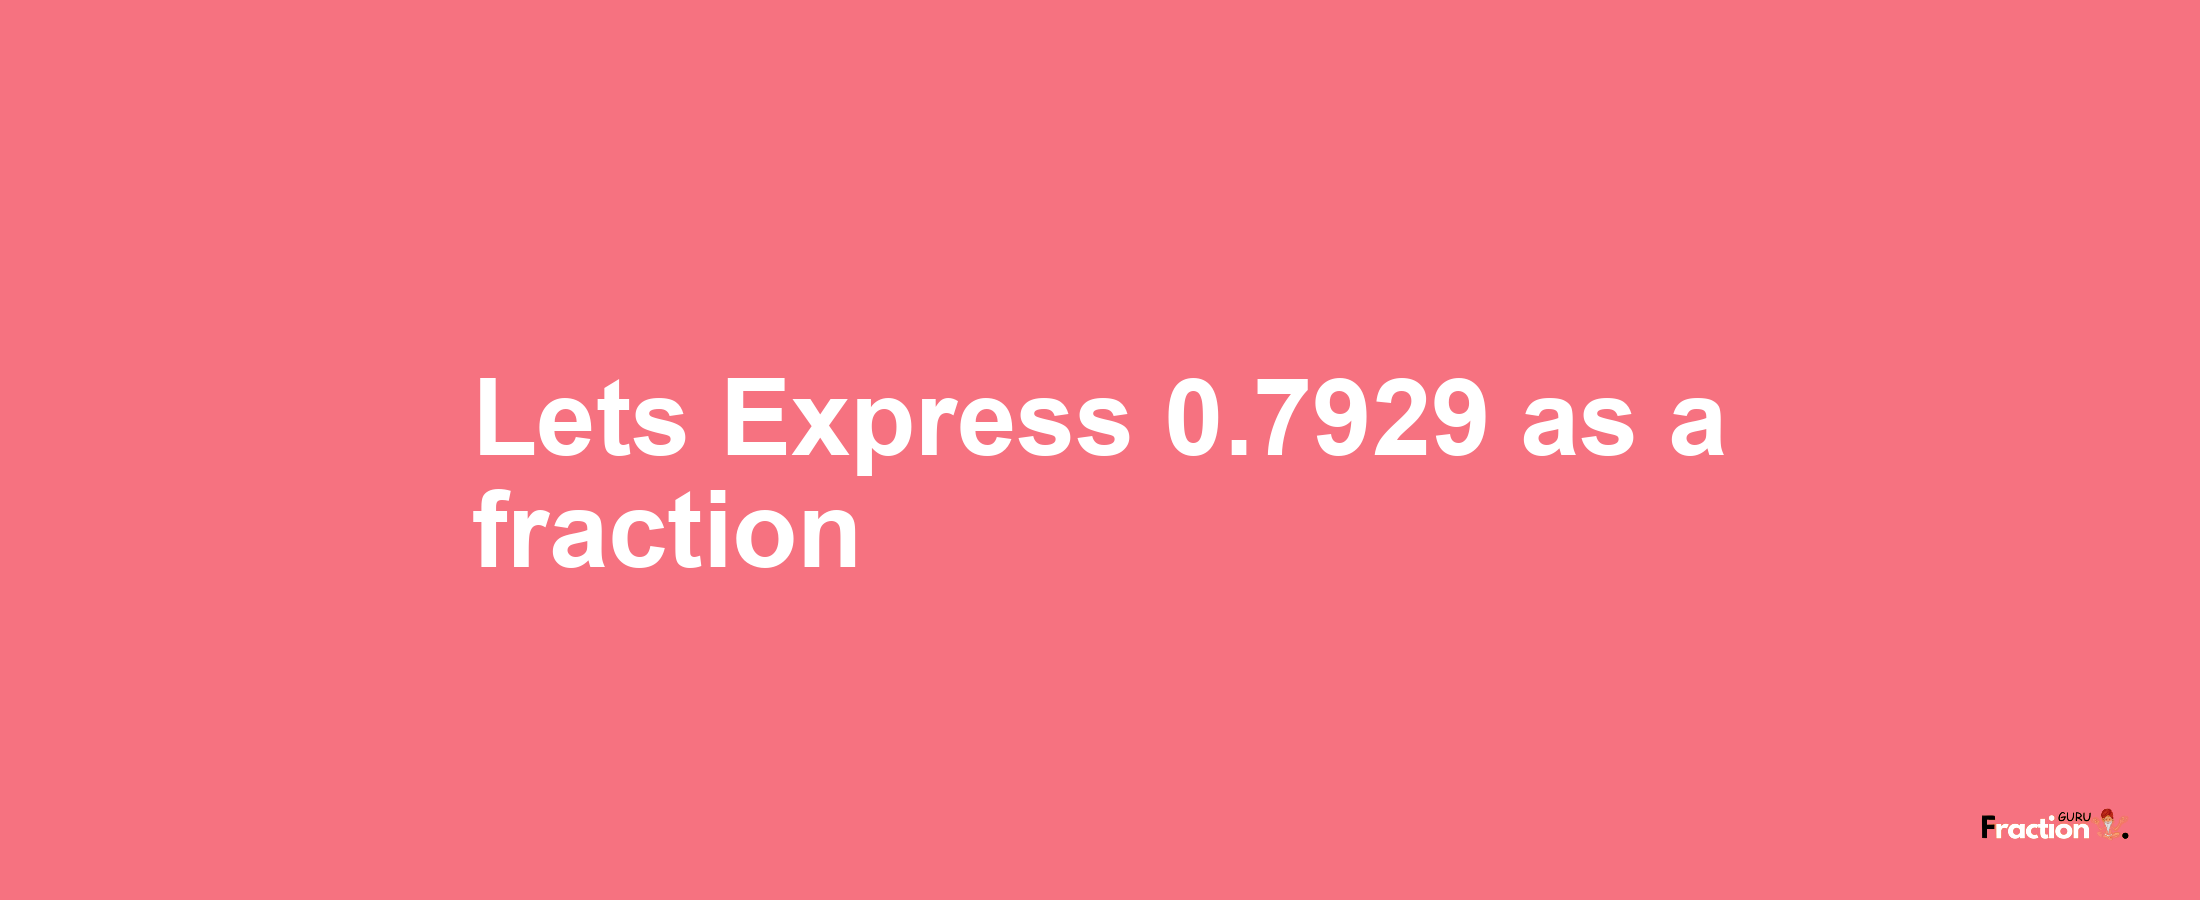 Lets Express 0.7929 as afraction